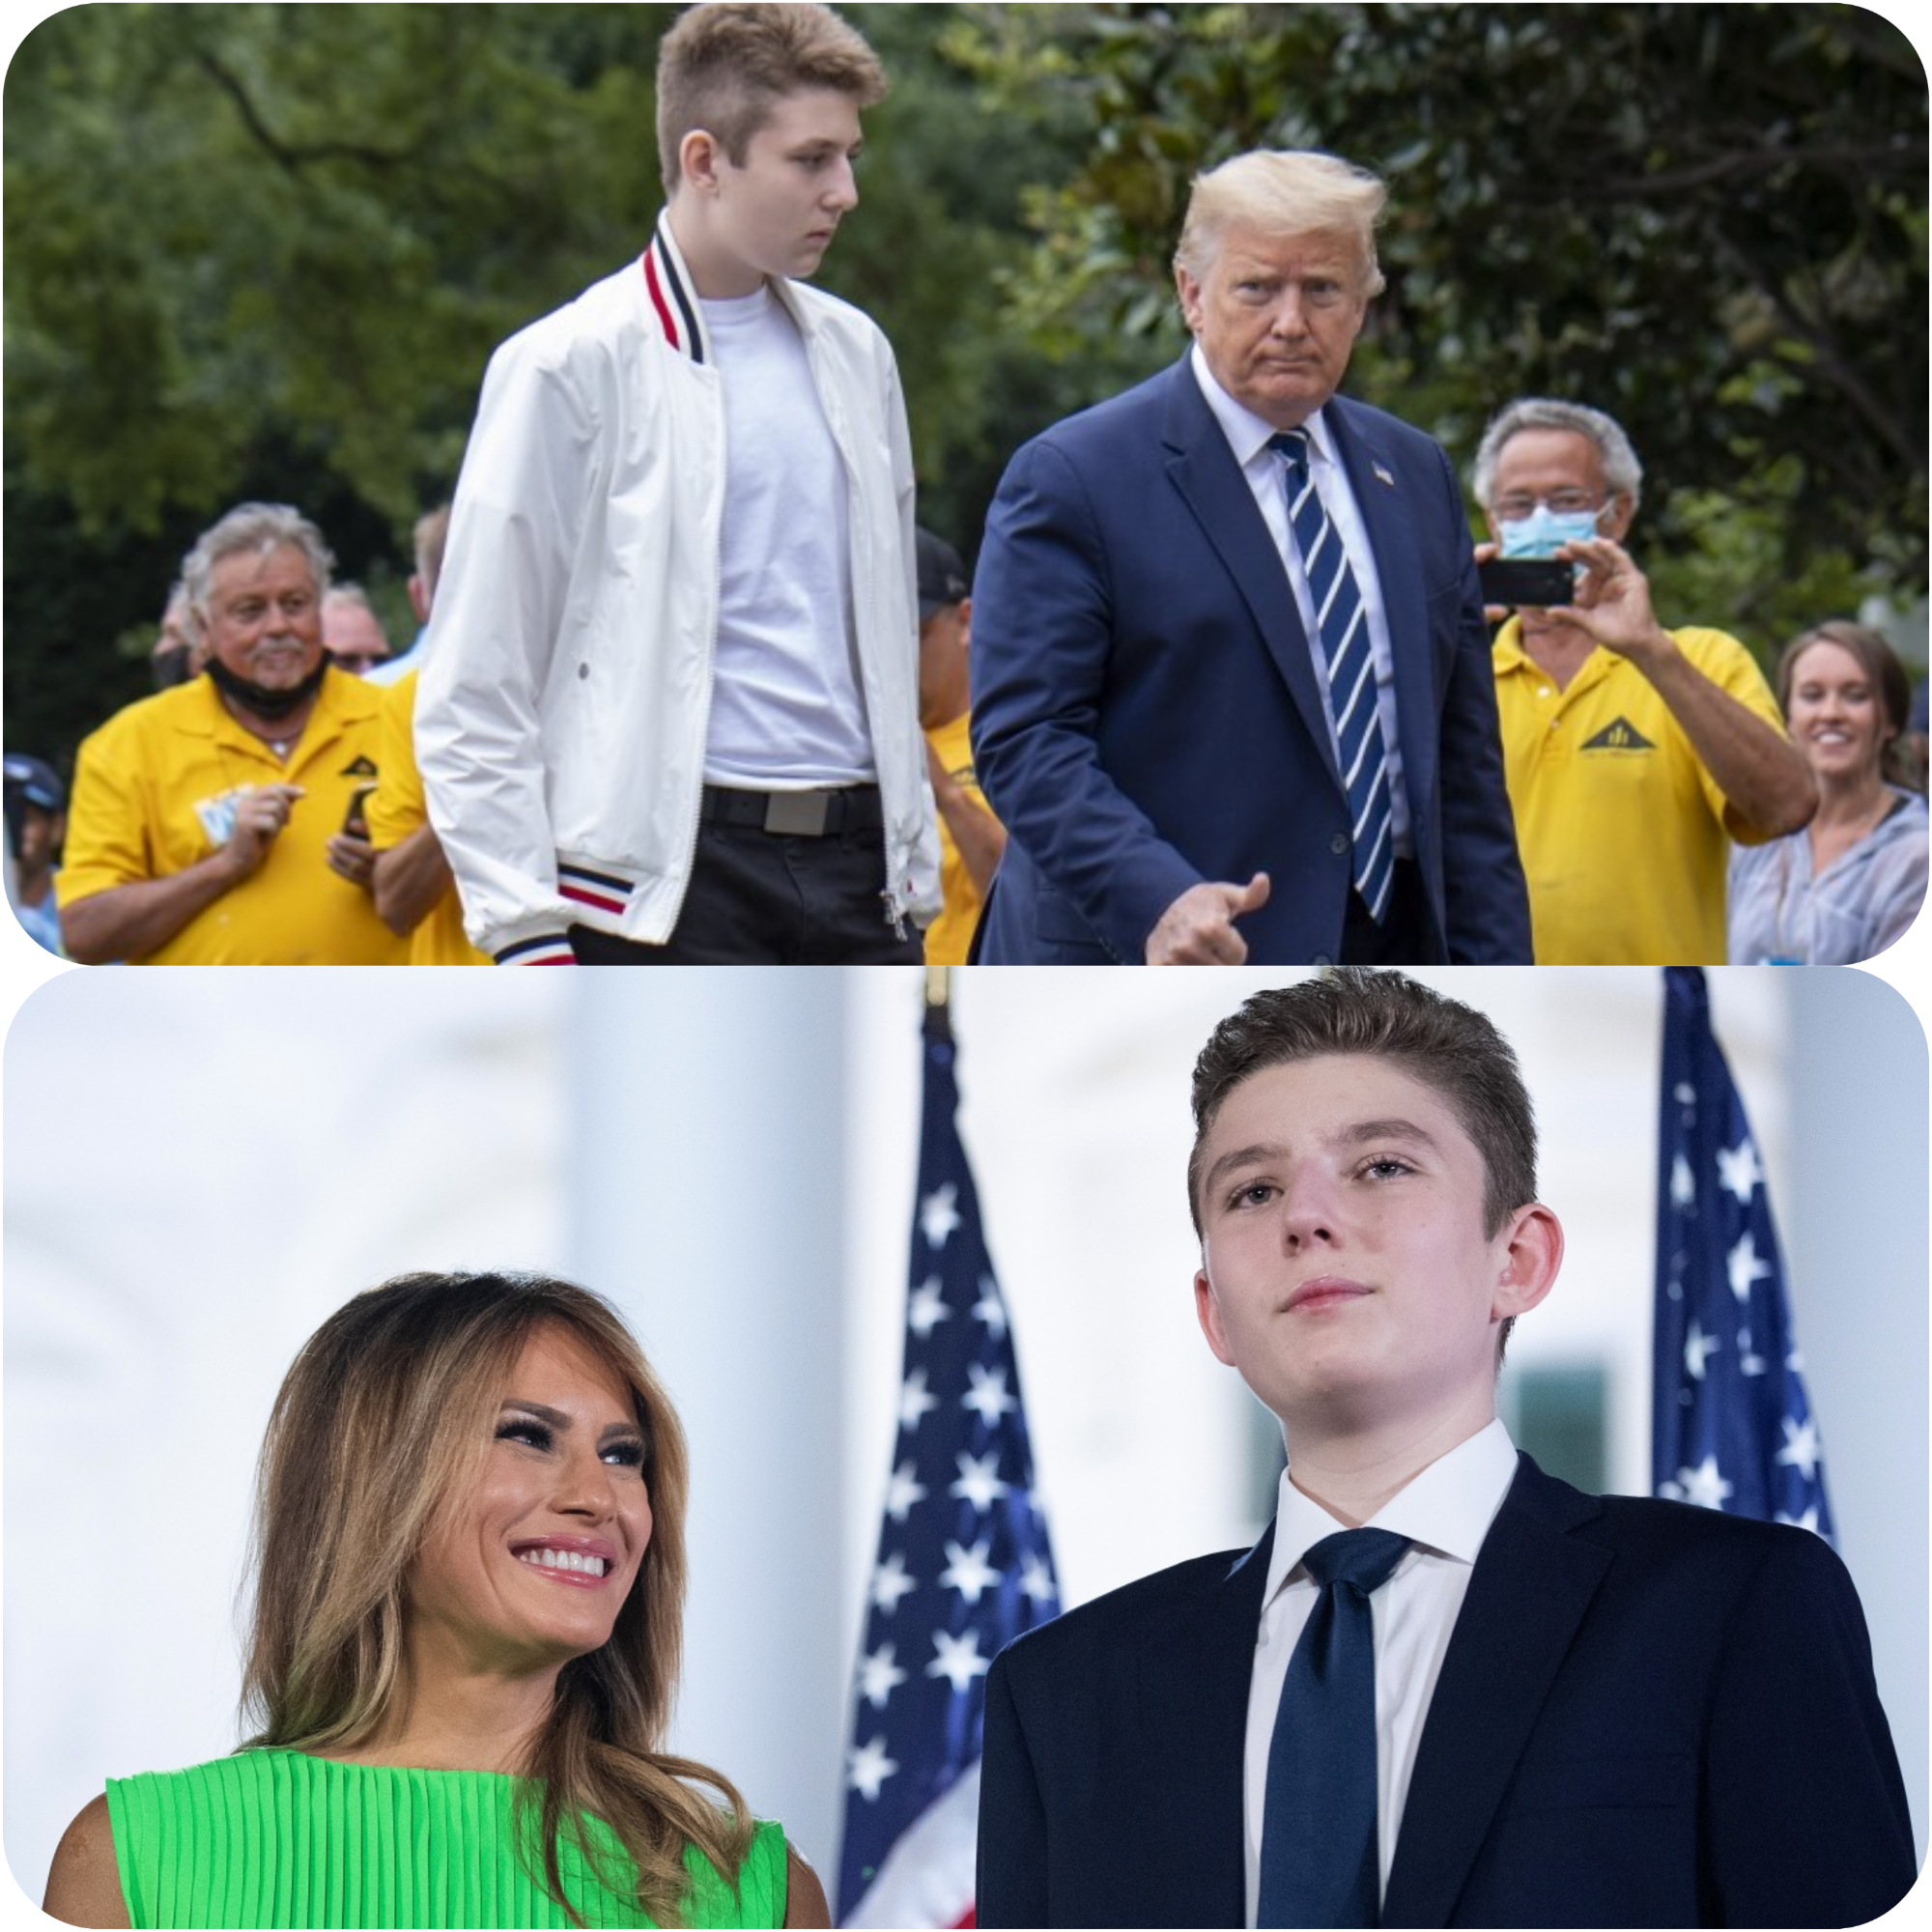 Barron Trump's Height Revealed; Likely Among Tallest Presidential Sons In US History